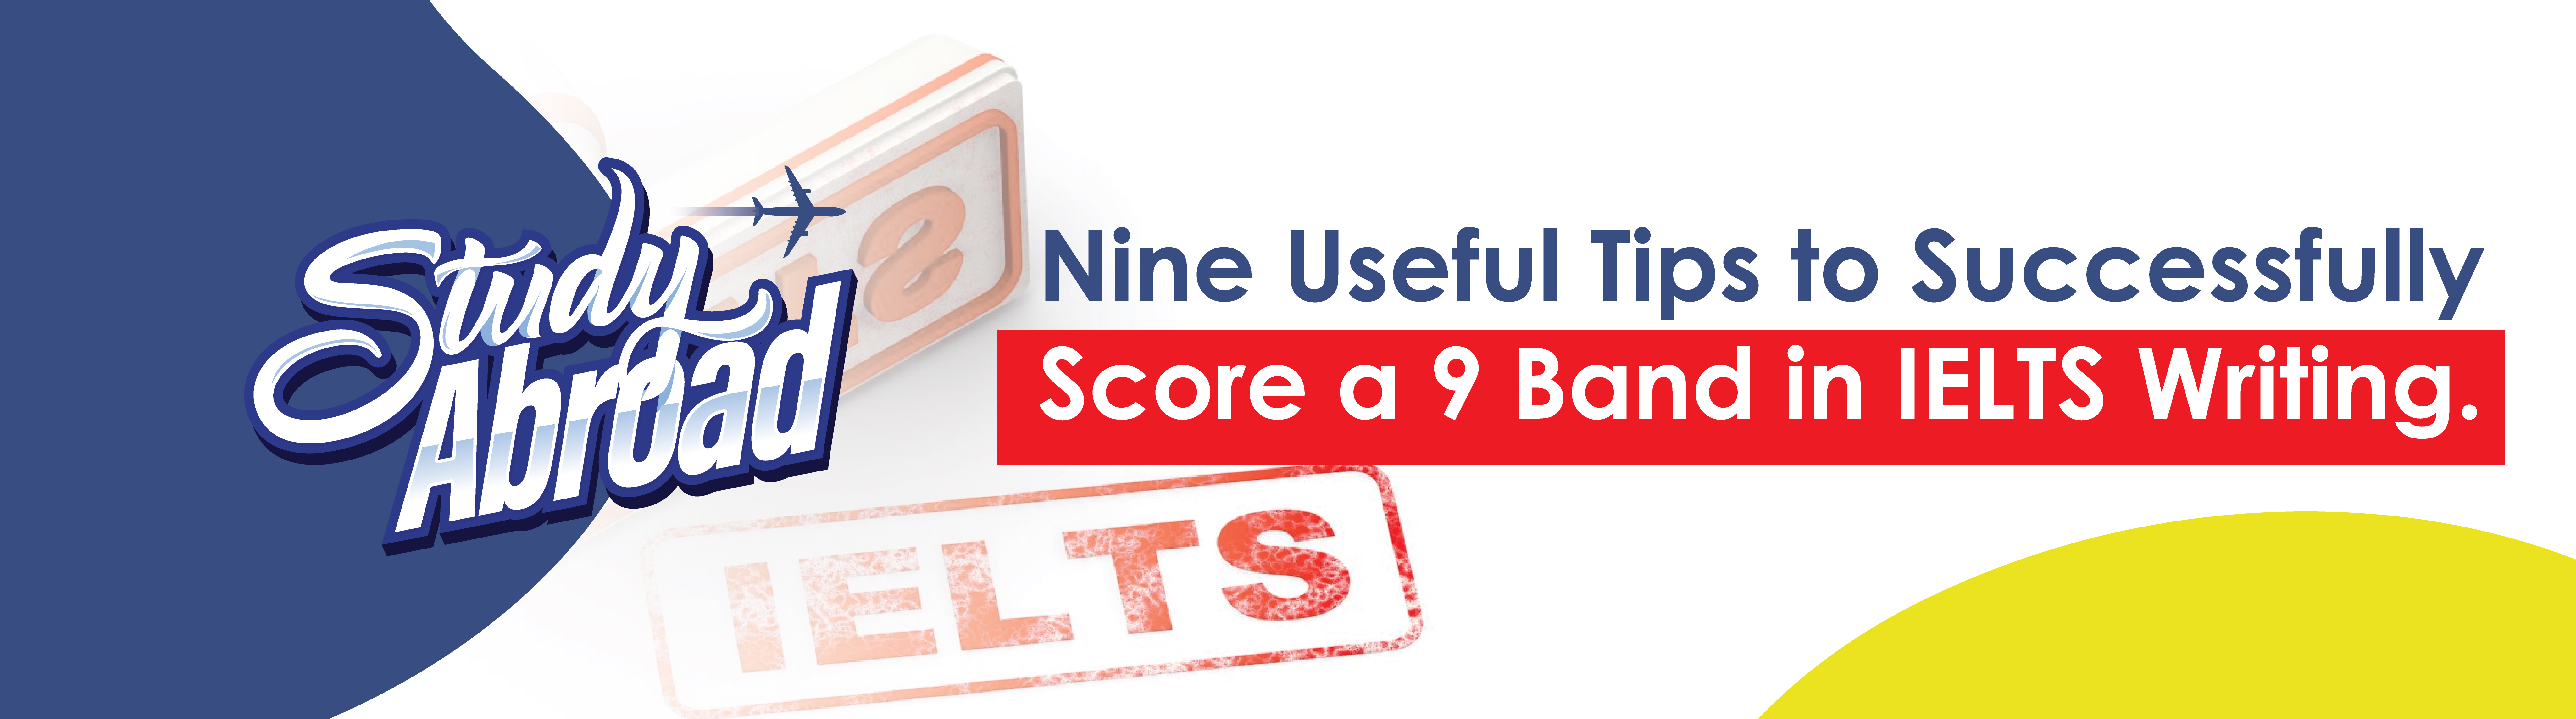 Nine Useful Tips to Successfully Score a 9 Band in IELTS Writing